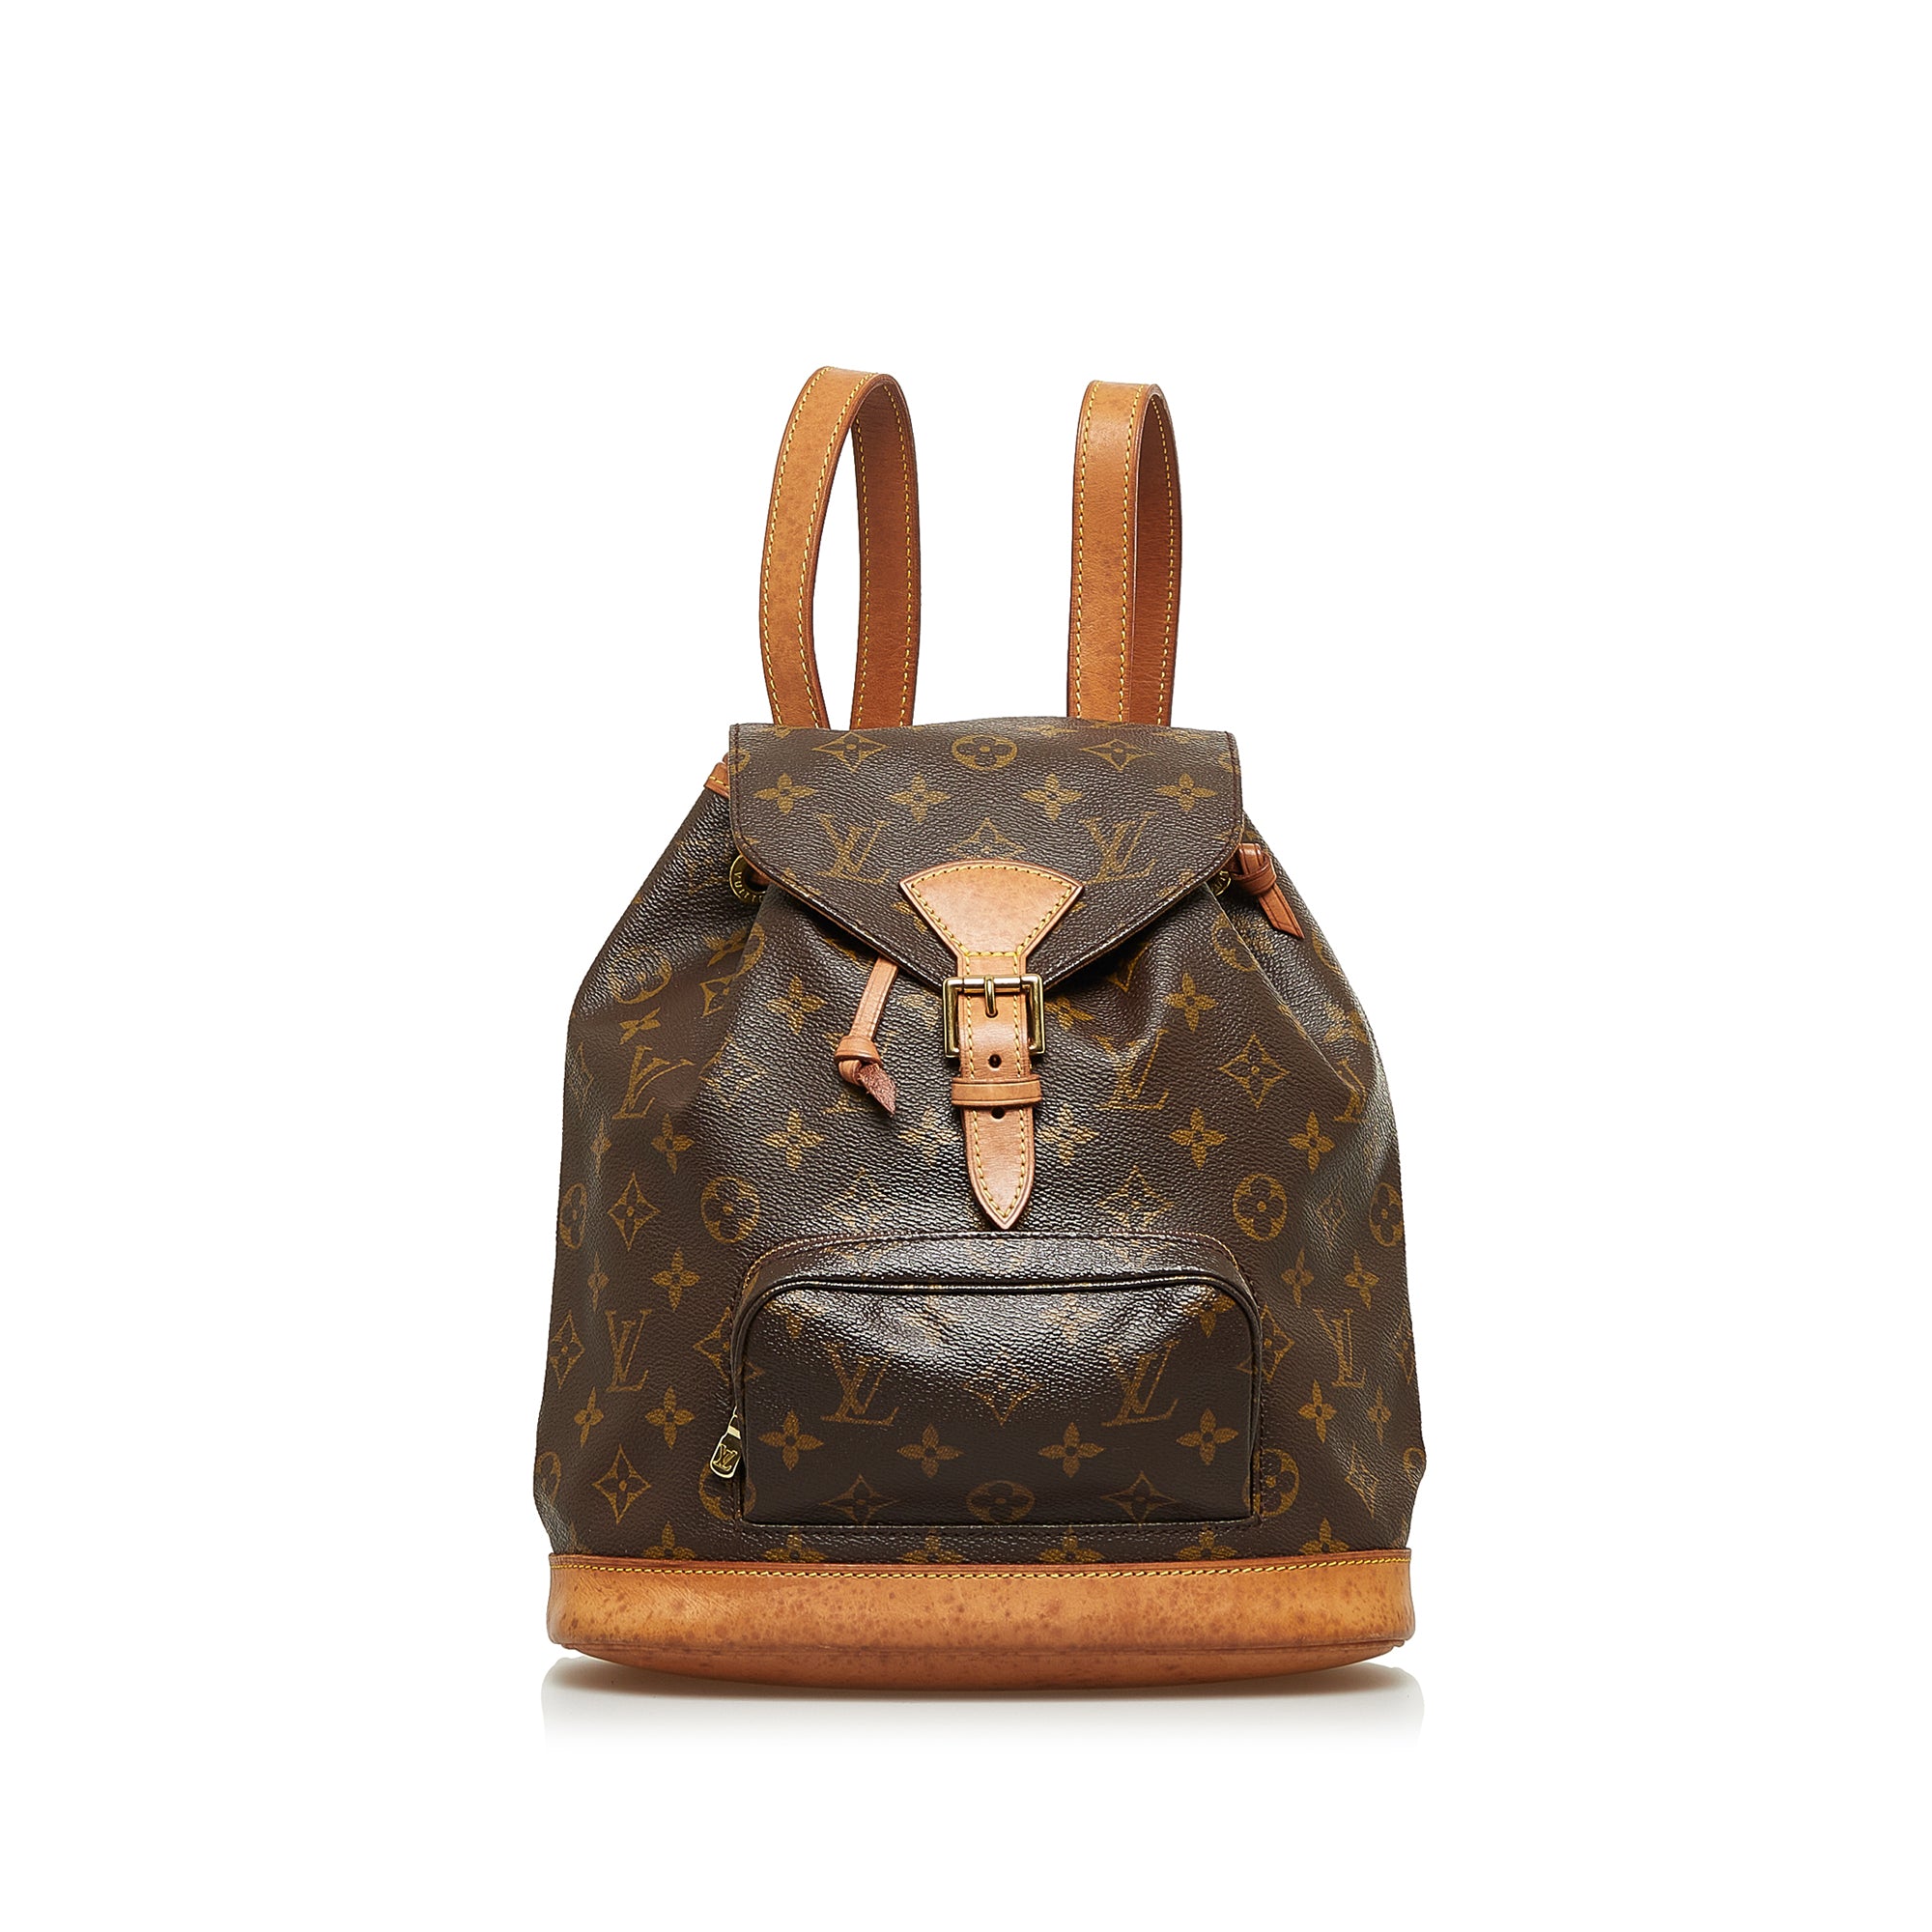 Montsouris Backpack PM (Authentic Pre-Owned) – The Lady Bag